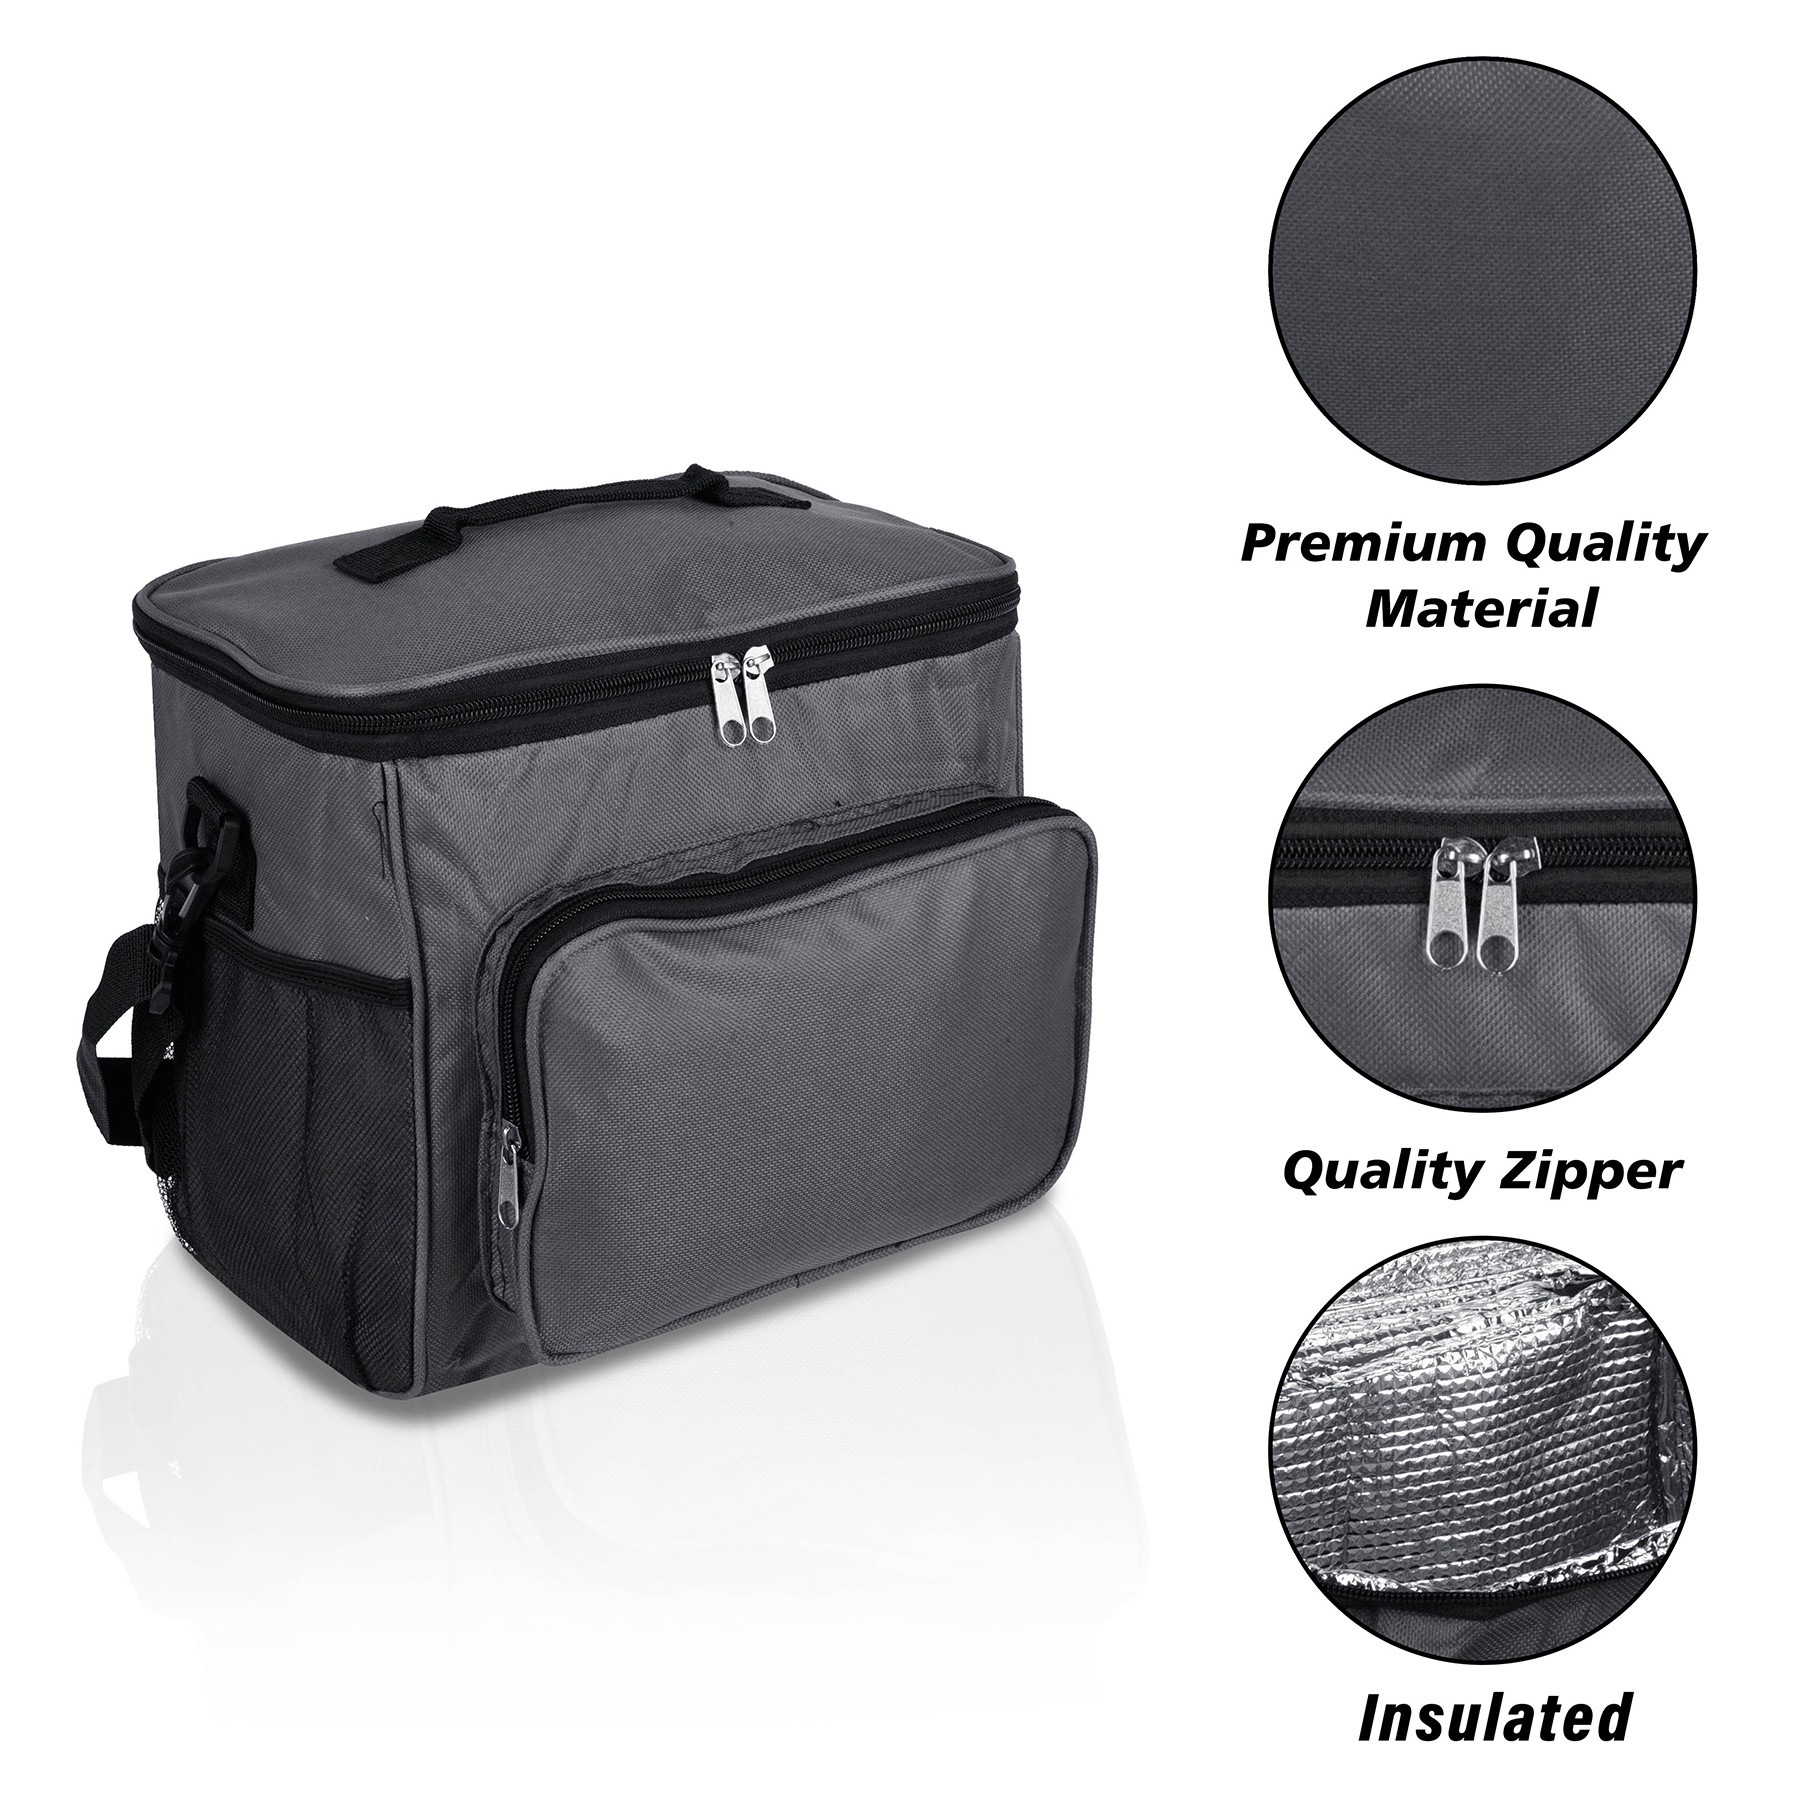 Kuber Industries Lunch Bag | Rexine Thermal Insulated Lunch Bag | Tiffin Bag with Bottle Holder | Waterproof Top Handle Lunch Bag | Front Pocket Lunch Bag for Office | Gray